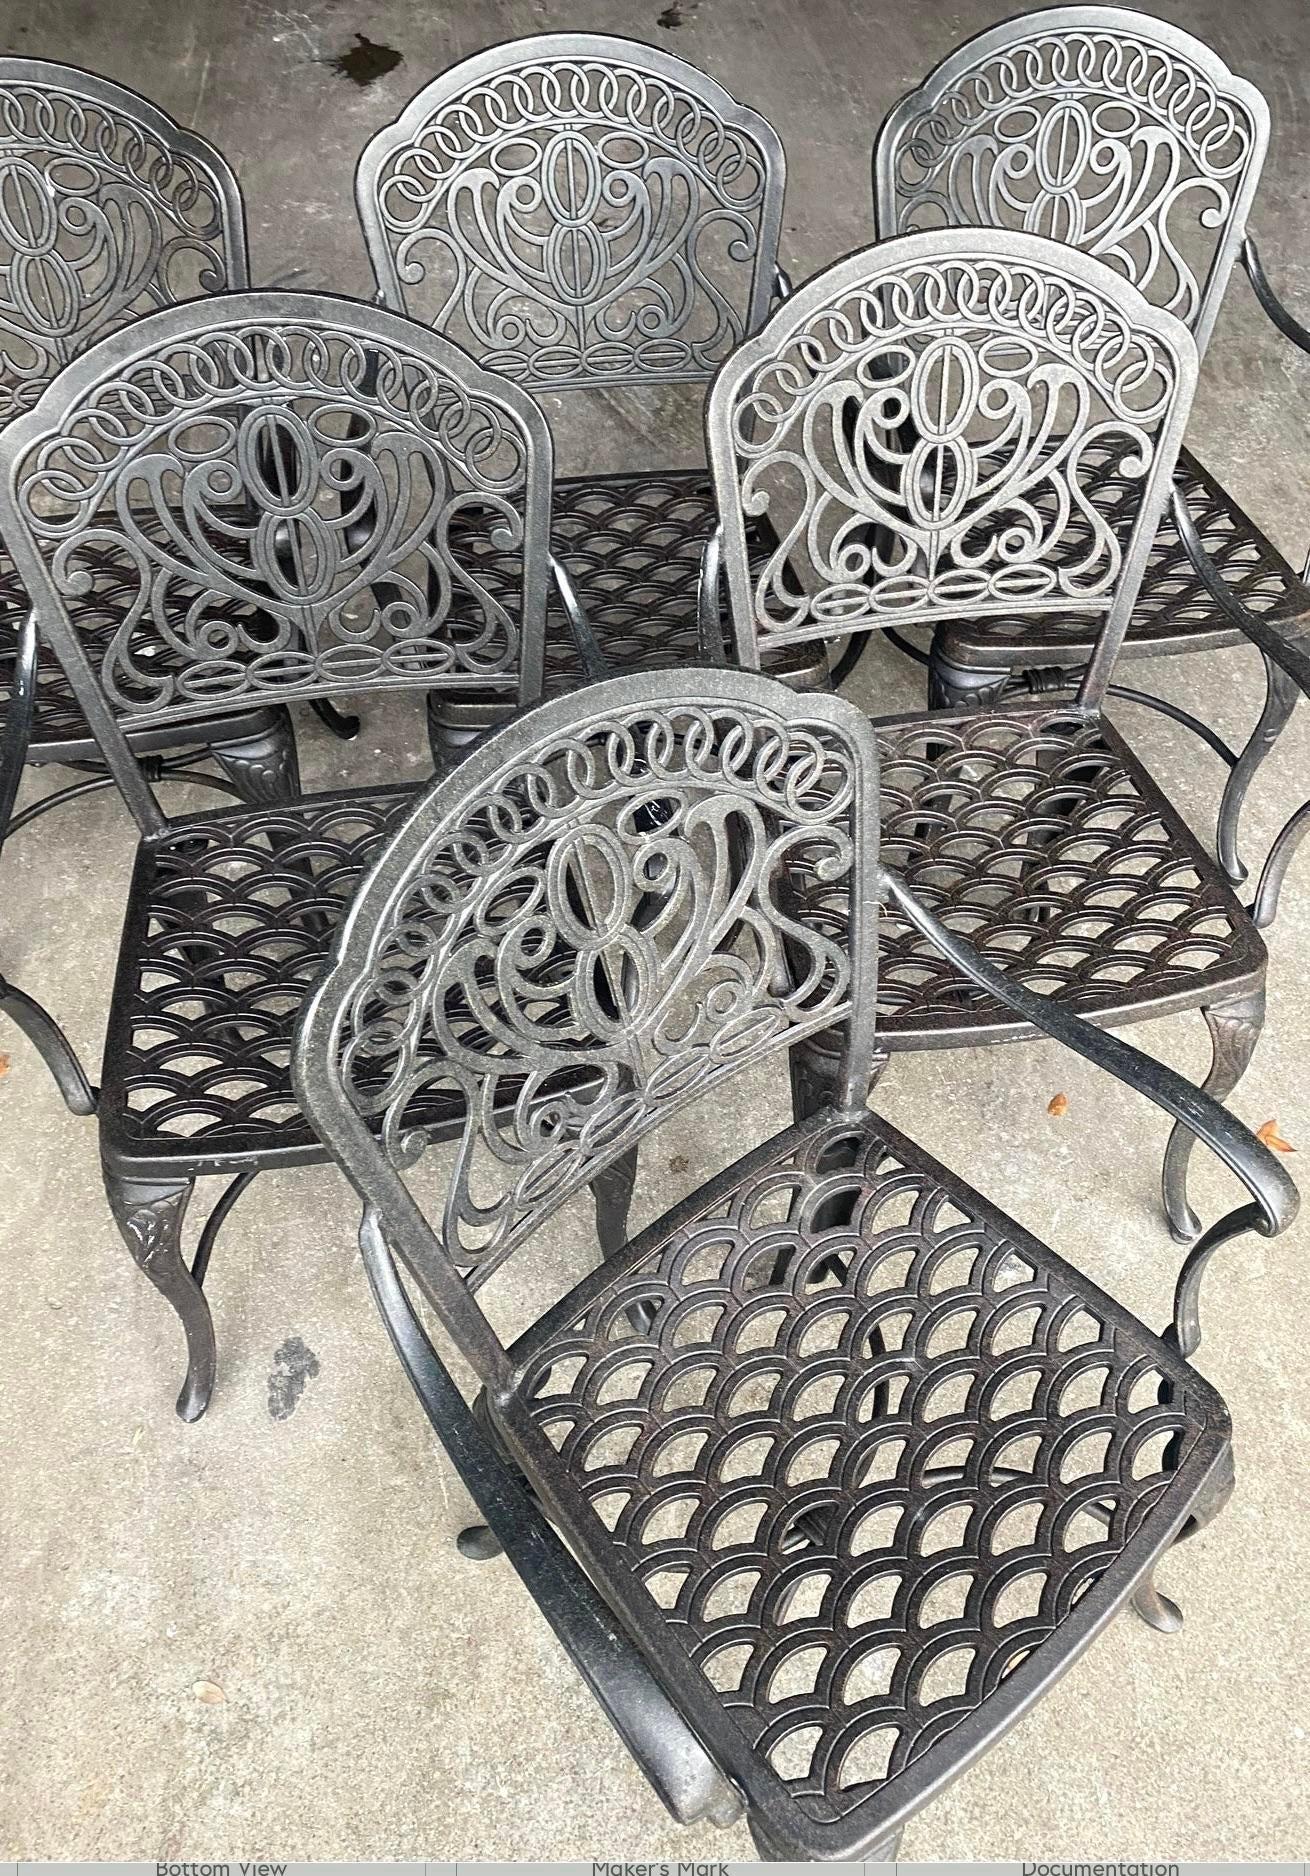 Vintage Coastal Hanamint Cast Aluminum Outdoor Dining Chairs - Set of 6 For Sale 4